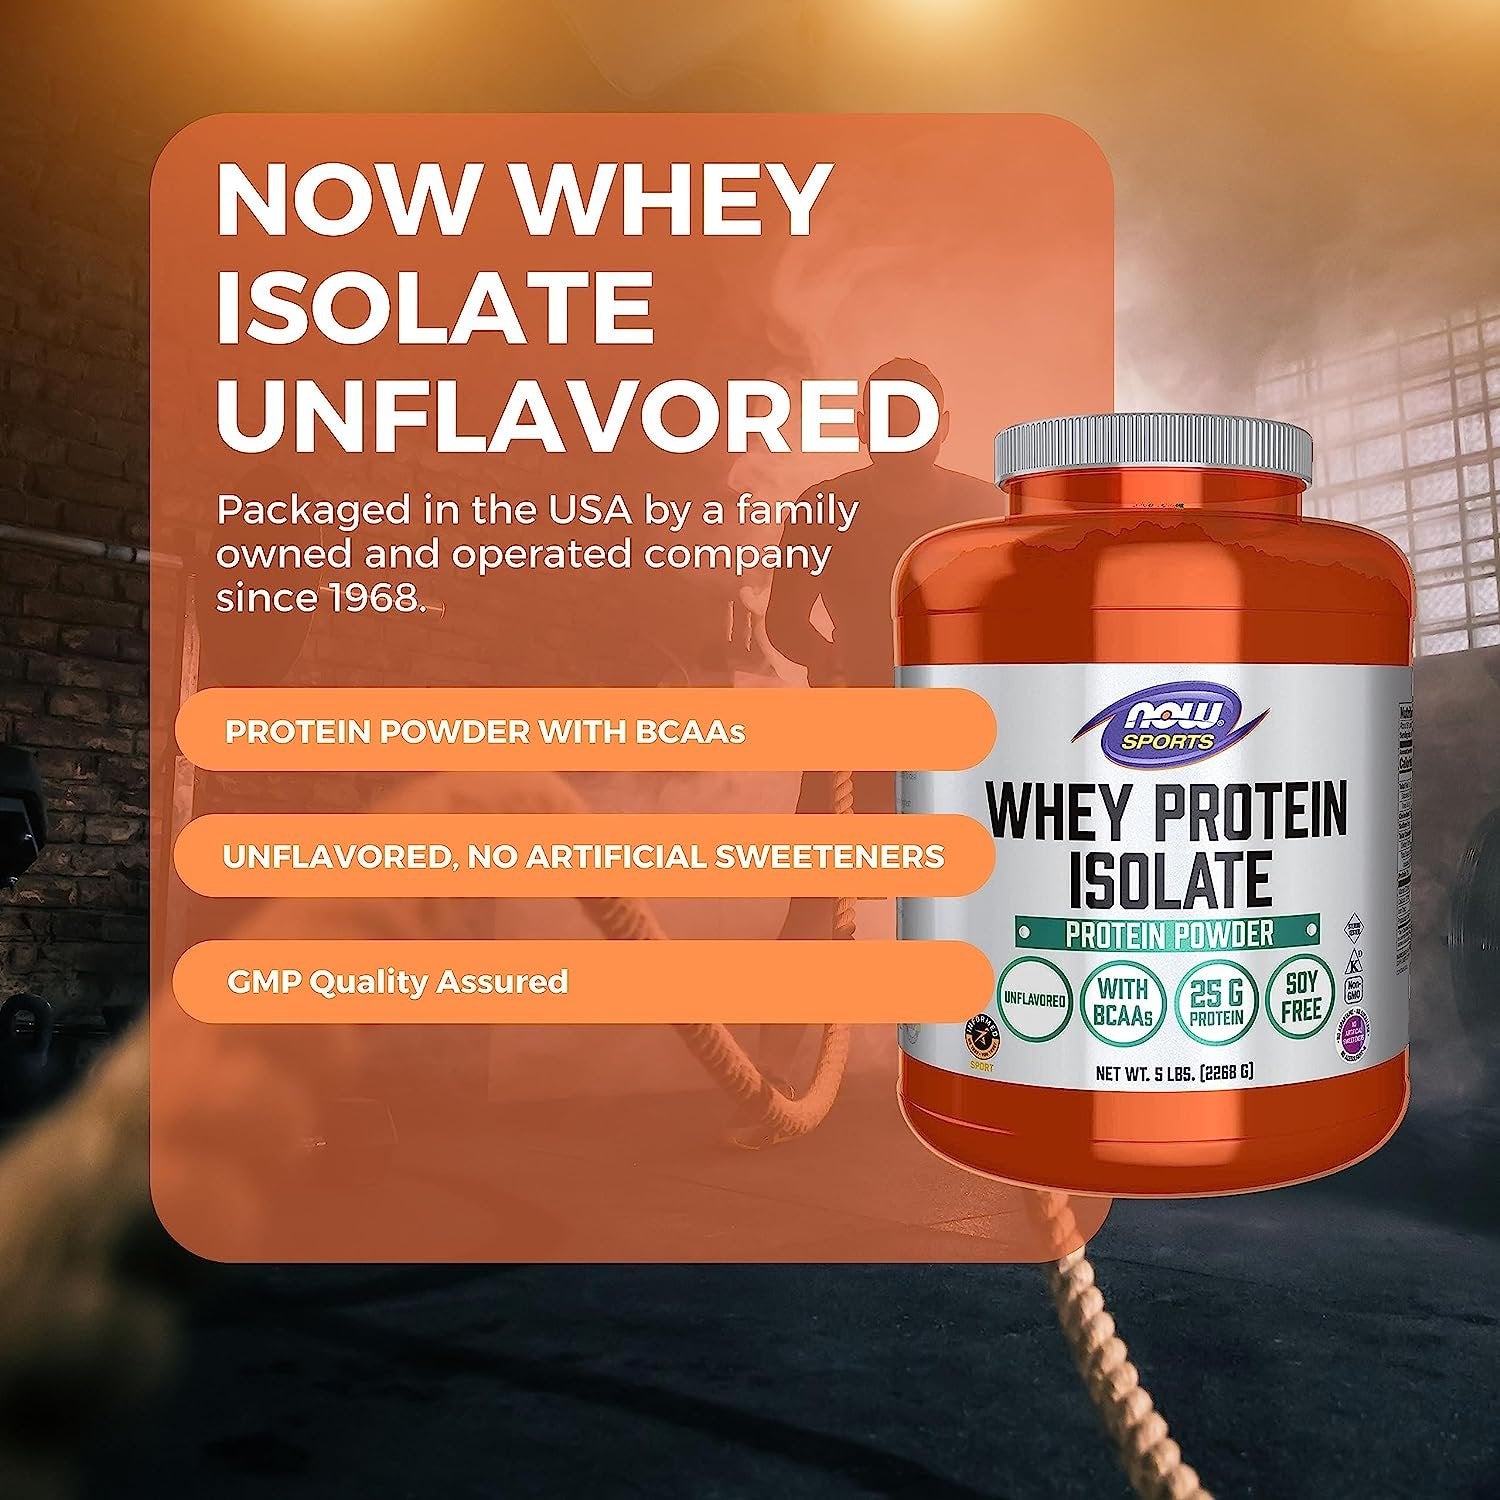 Worldwide Nutrition Now Sports Nutrition, Whey Protein Isolate, 25 g with BCAAs, Unflavored Powder, 5-Pound with Bonus Multi-Purpose Key Chain